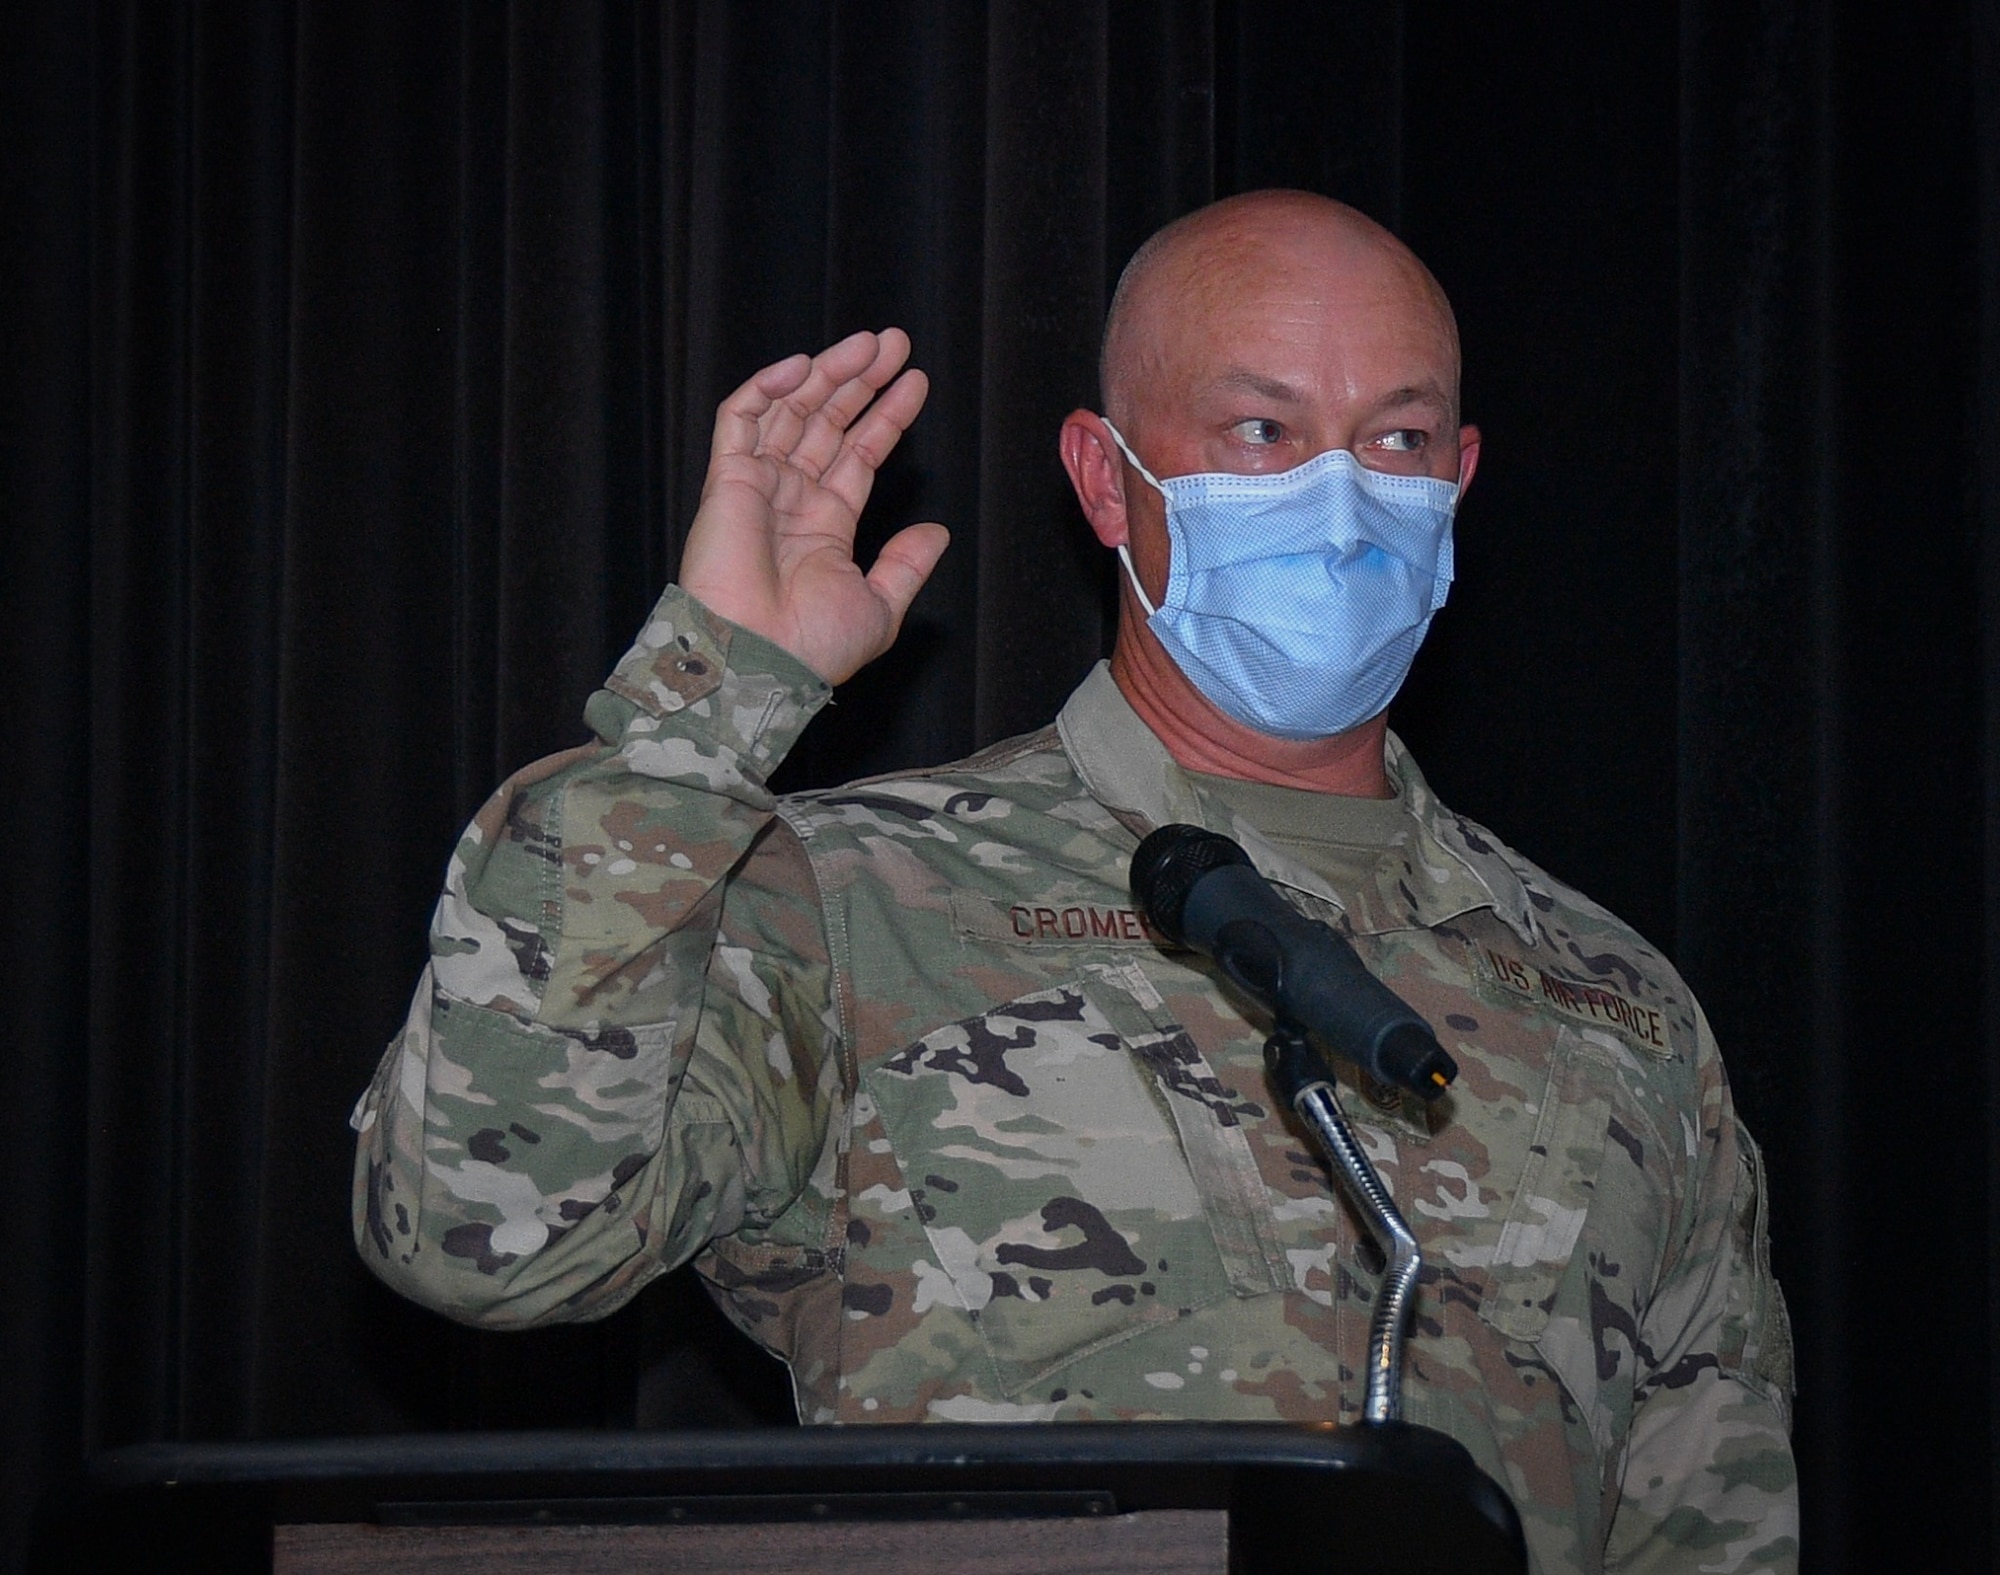 301st Fighter Wing Medical Squadron Superintendent Chief Master Sgt. Jerry Cromer charges MDS non-commissioned officers with the responsibilities which come from advancing through one's military career during an MDS enlisted promotion ceremony at NAS JRB Fort Worth on August 8, 2021. The message of taking care of the mission and your people was clearly evident throughout the event. (U.S. Air Force photo by Master Sgt. Jeremy Roman)